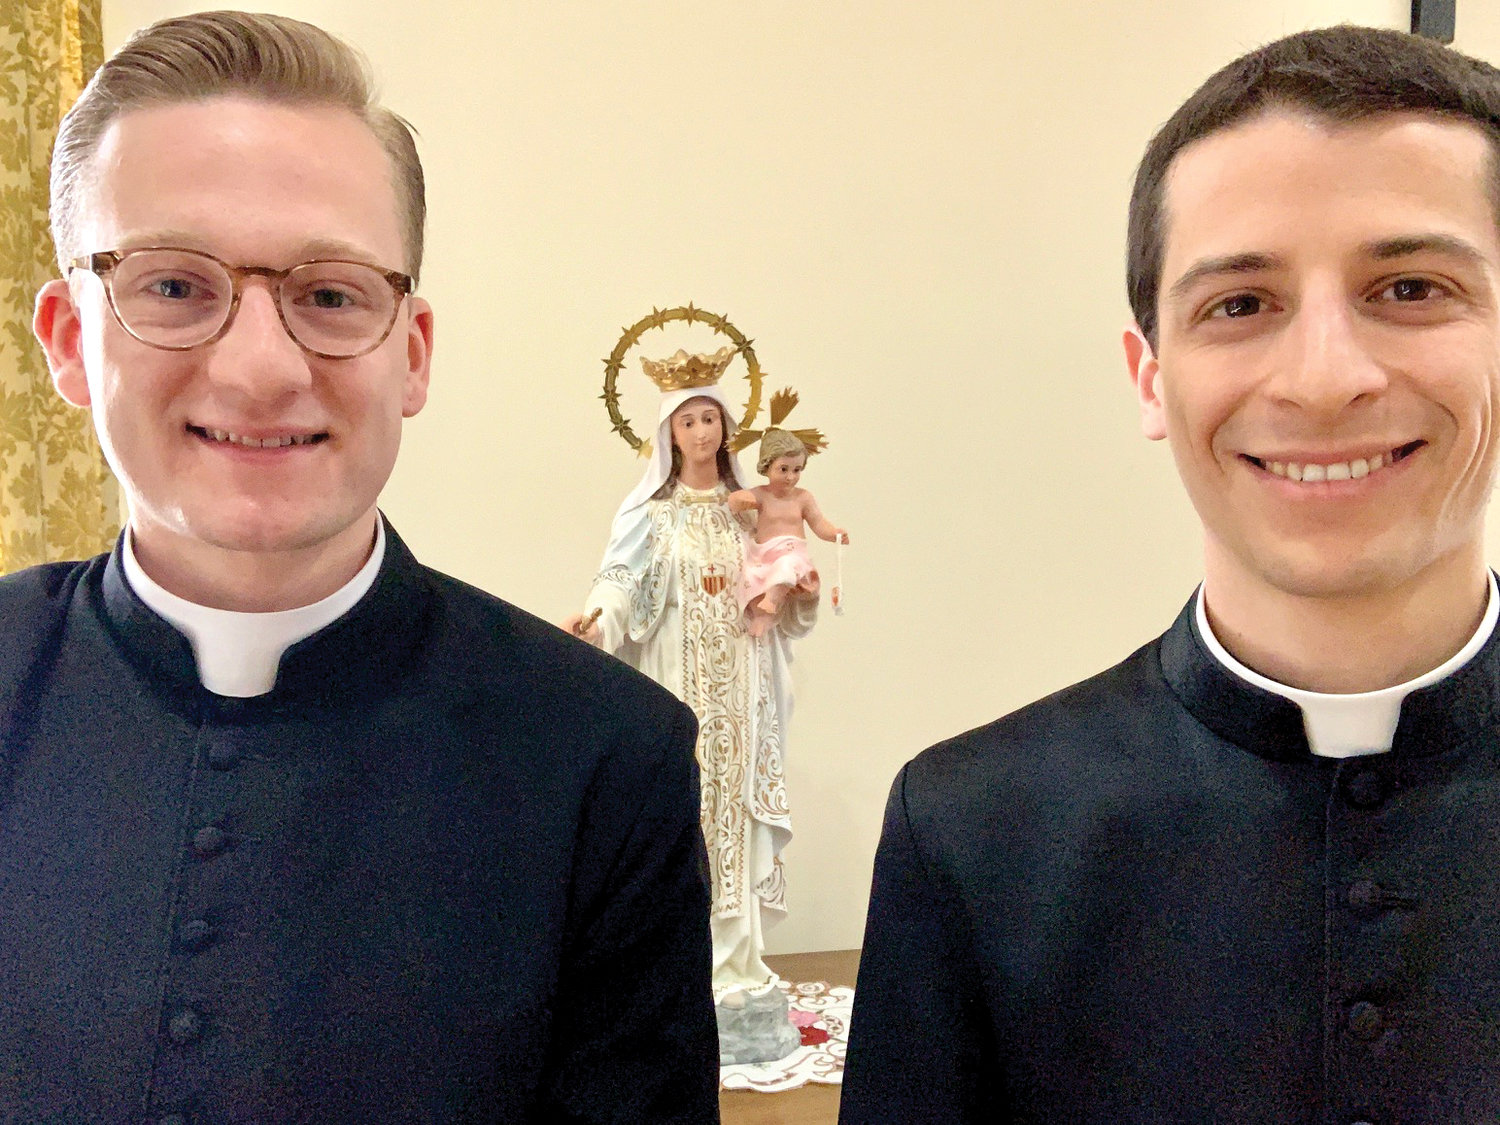 Father Michael Connolly, left, and Father Louis Masi are staying at an unoccupied retreat house while in isolation for the pastoral care mission to bring prayer and the sacraments to the sick and dying.